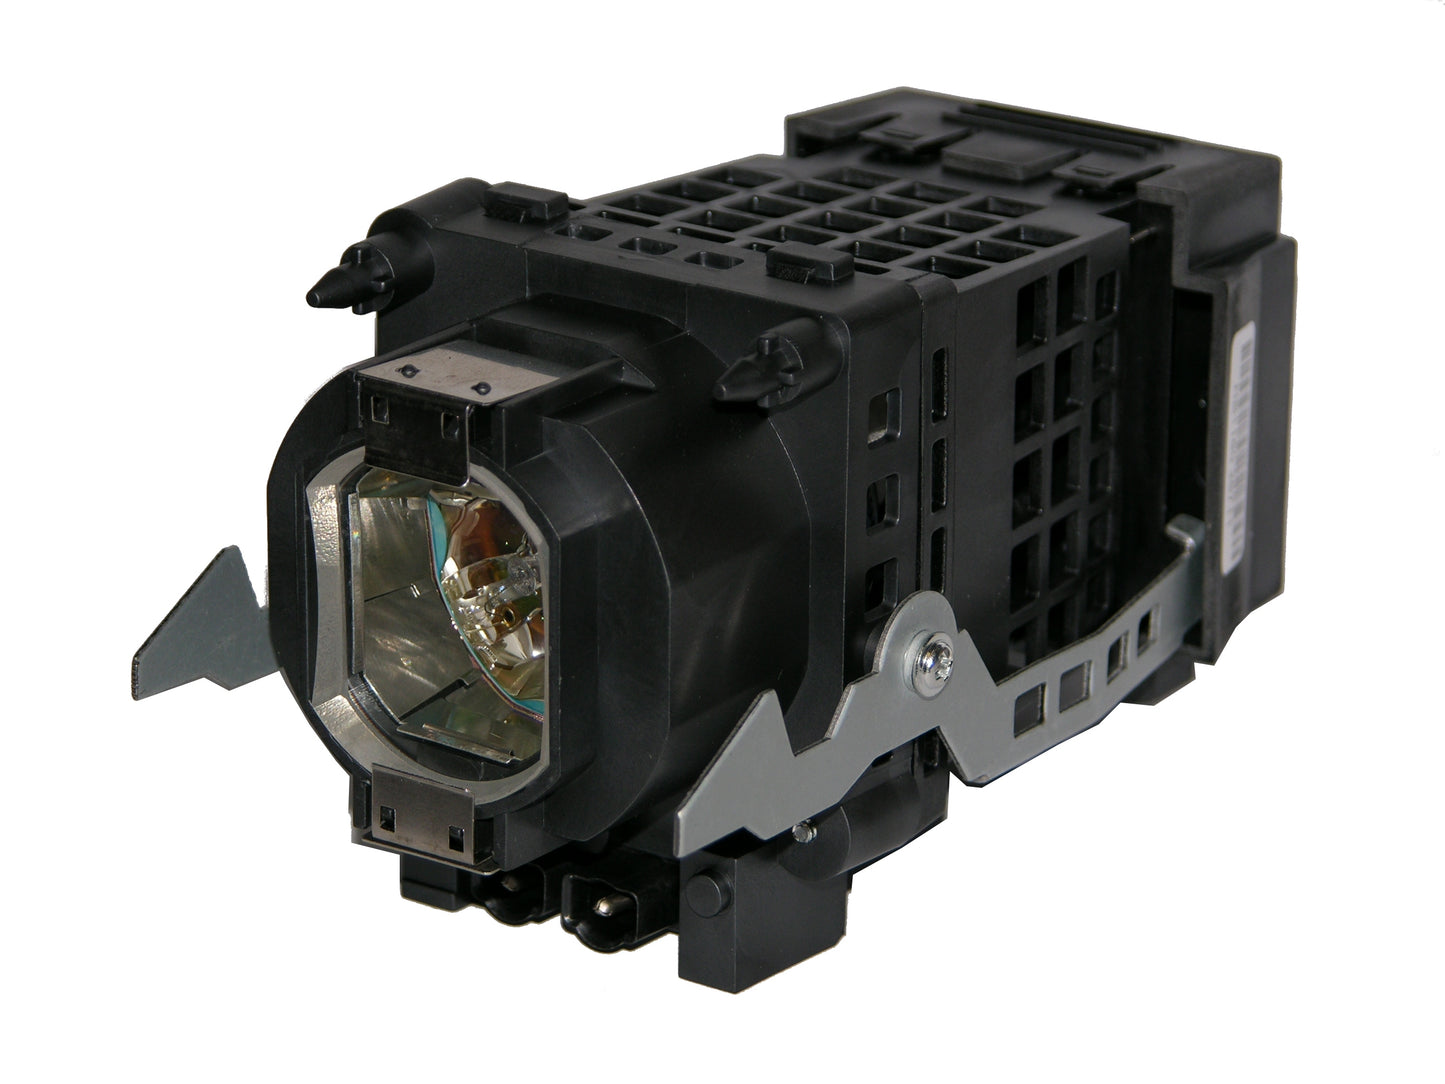 Neolux DLP Lamp/Bulb/Housing for Sony F-9308-750-0, XL-2400U, with Neolux Lamp, Made by Osram